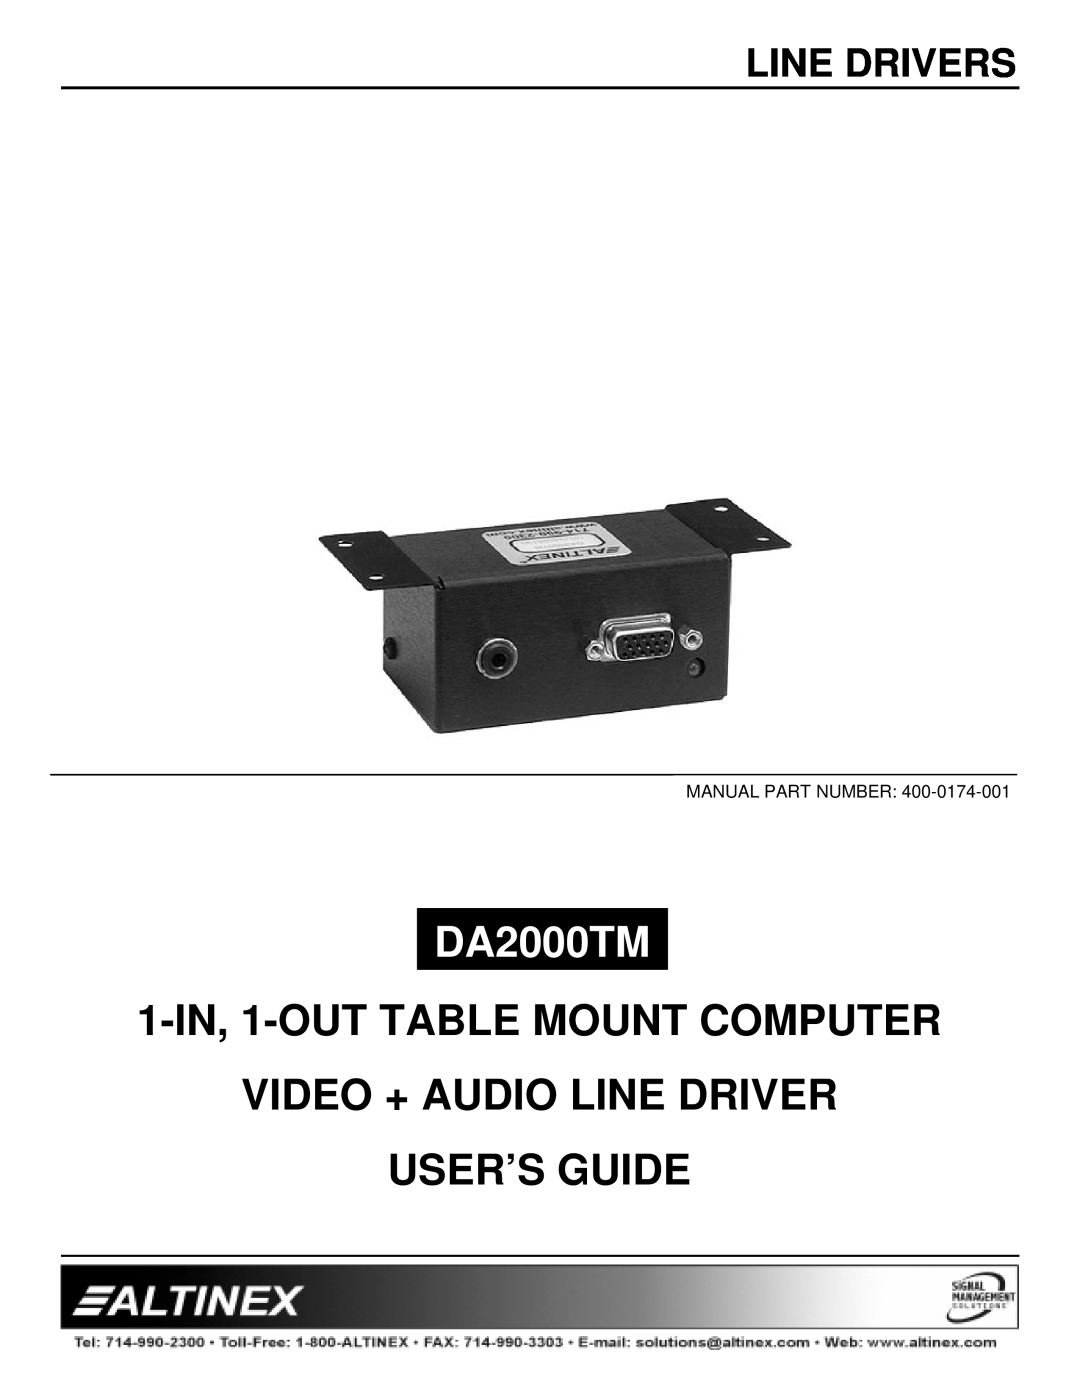 Altinex DA2000TM manual Line Drivers, 1-IN, 1-OUT TABLE MOUNT COMPUTER VIDEO + AUDIO LINE DRIVER, User’S Guide 